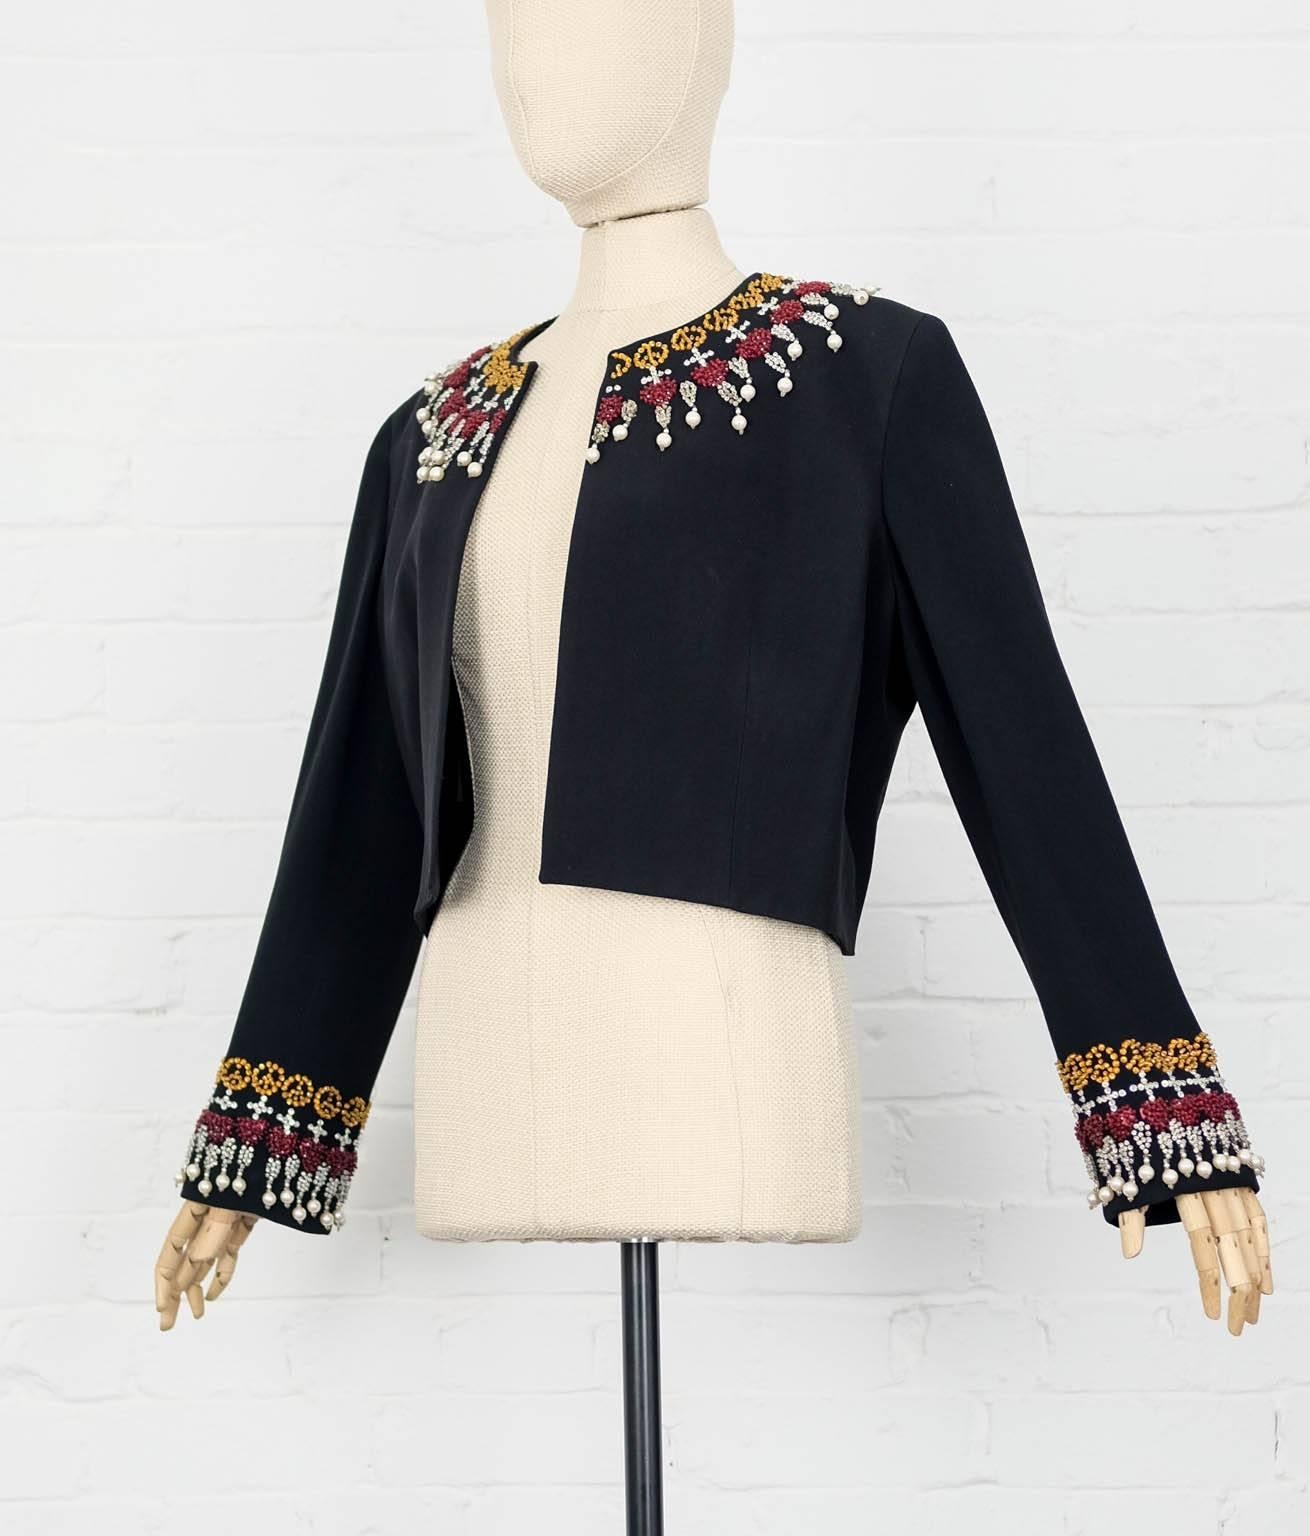 Moschino Vintage Black, red and gold-tone embellished cropped jacket 
featuring a round neck, an open front, beaded embroidery, long sleeves, a straight hem and faux pearl embellishments.

Mesurements:
Total lenght 46 cm
Waist 106 cm
Bust 112